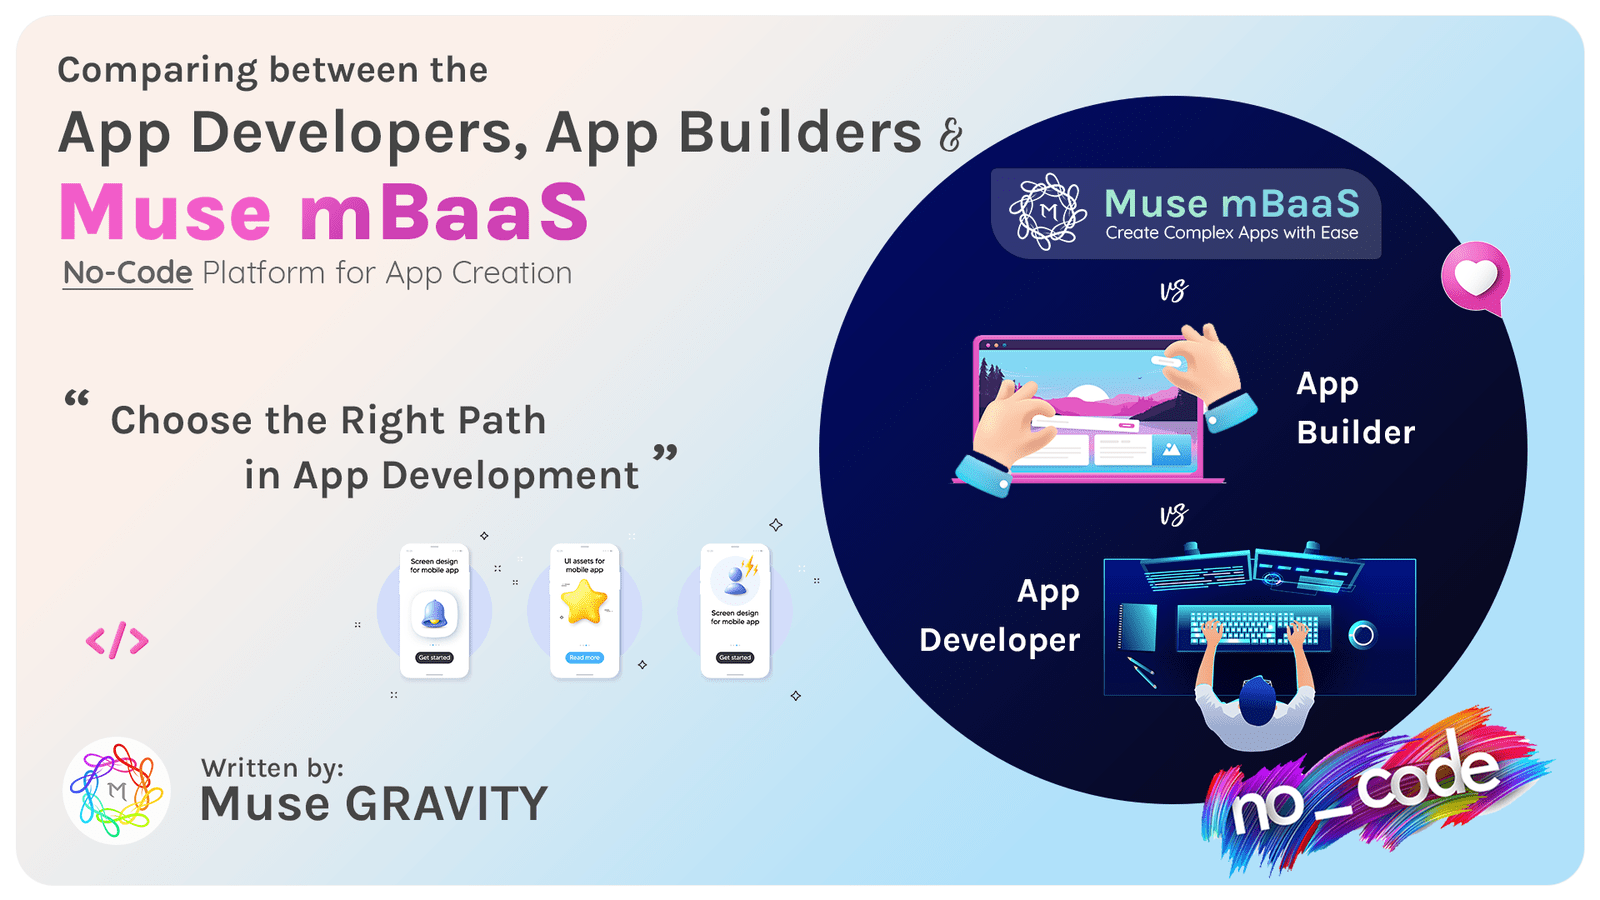 Comparing Traditional App Development, App Builders, & Muse mBaaS